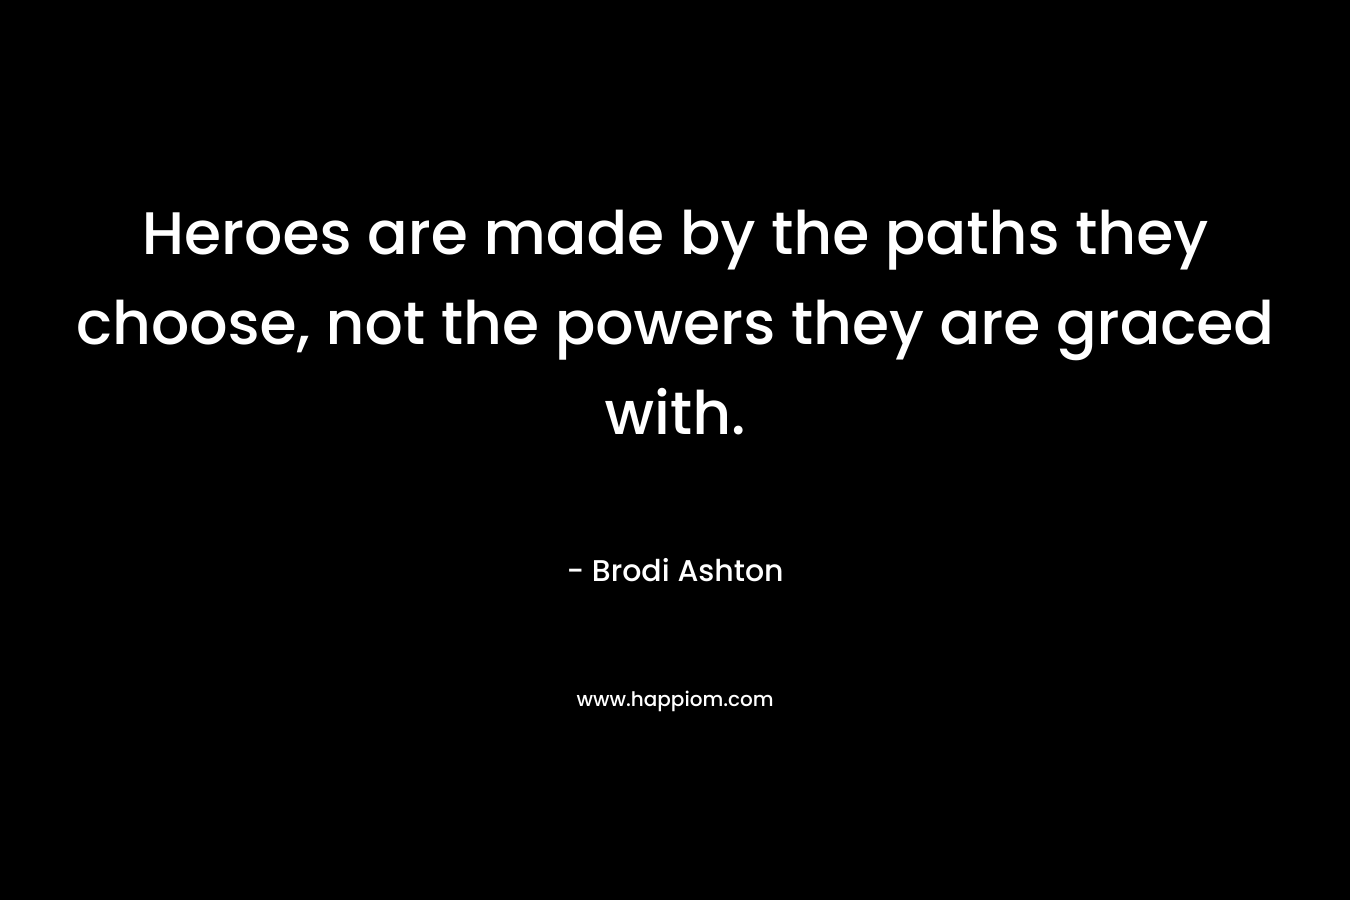 Heroes are made by the paths they choose, not the powers they are graced with. – Brodi Ashton